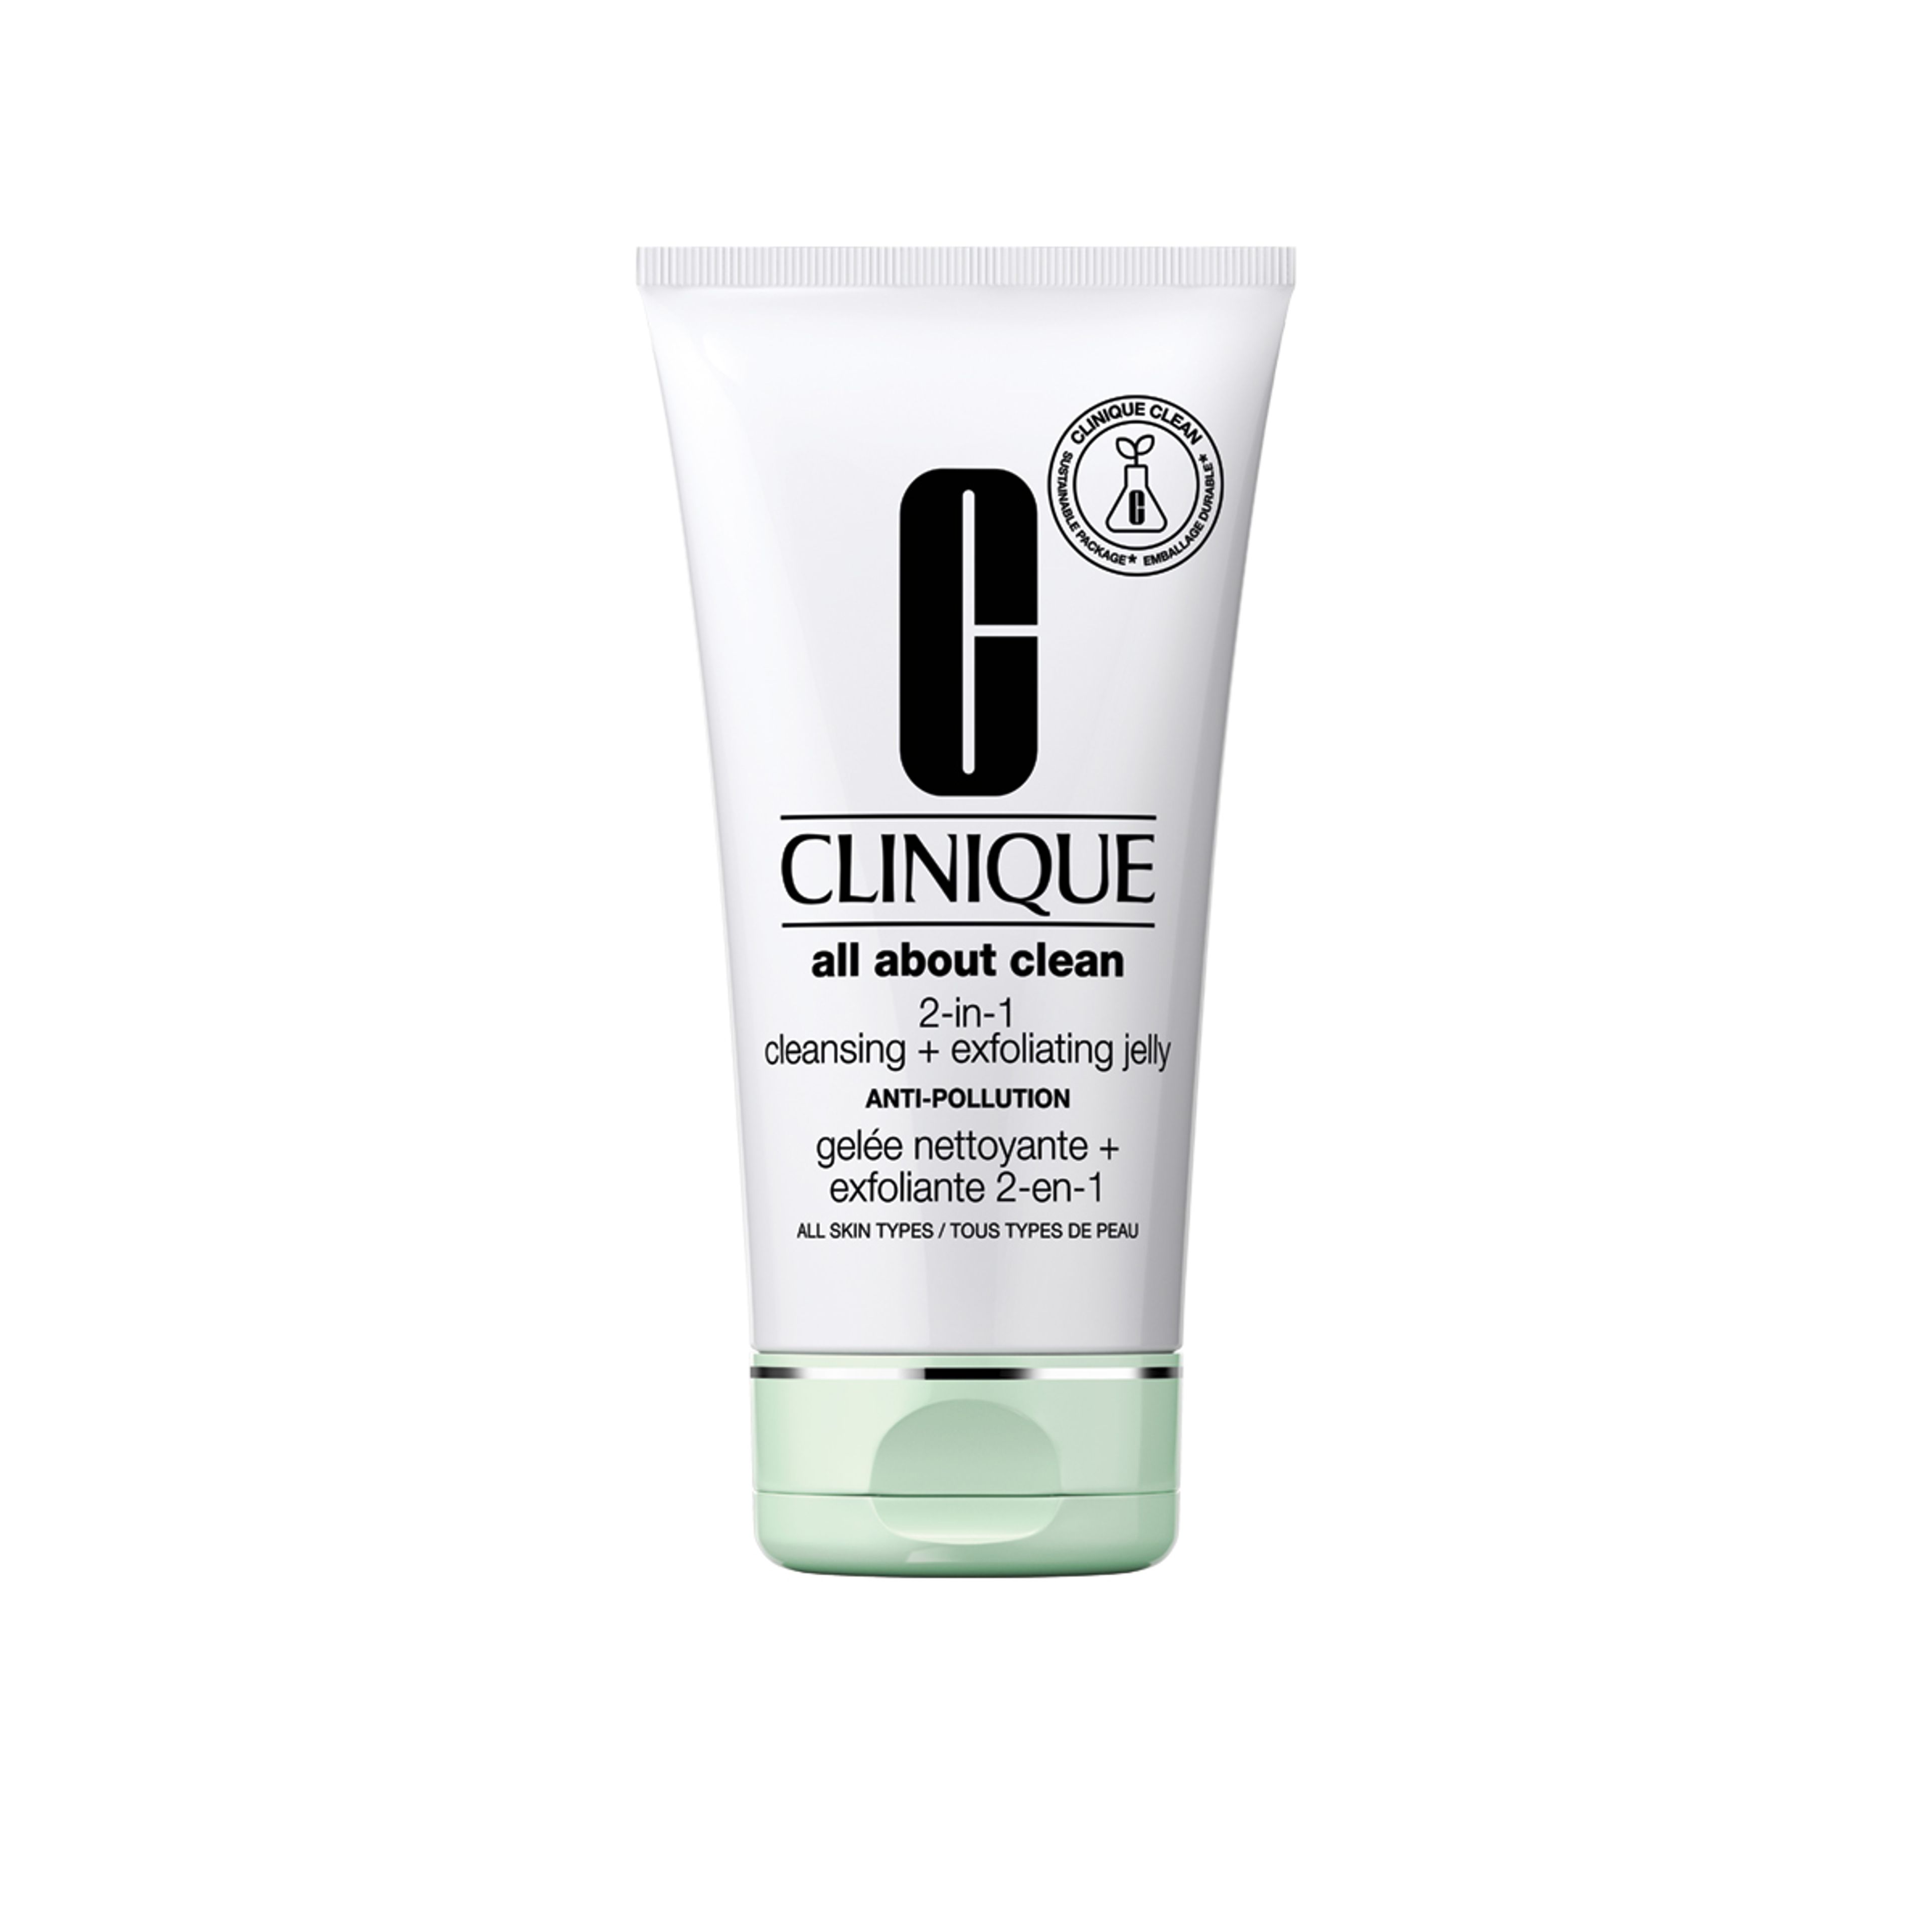 Clinique All About Clean™ 2-in-1 Cleansing + Exfoliating Jelly 1